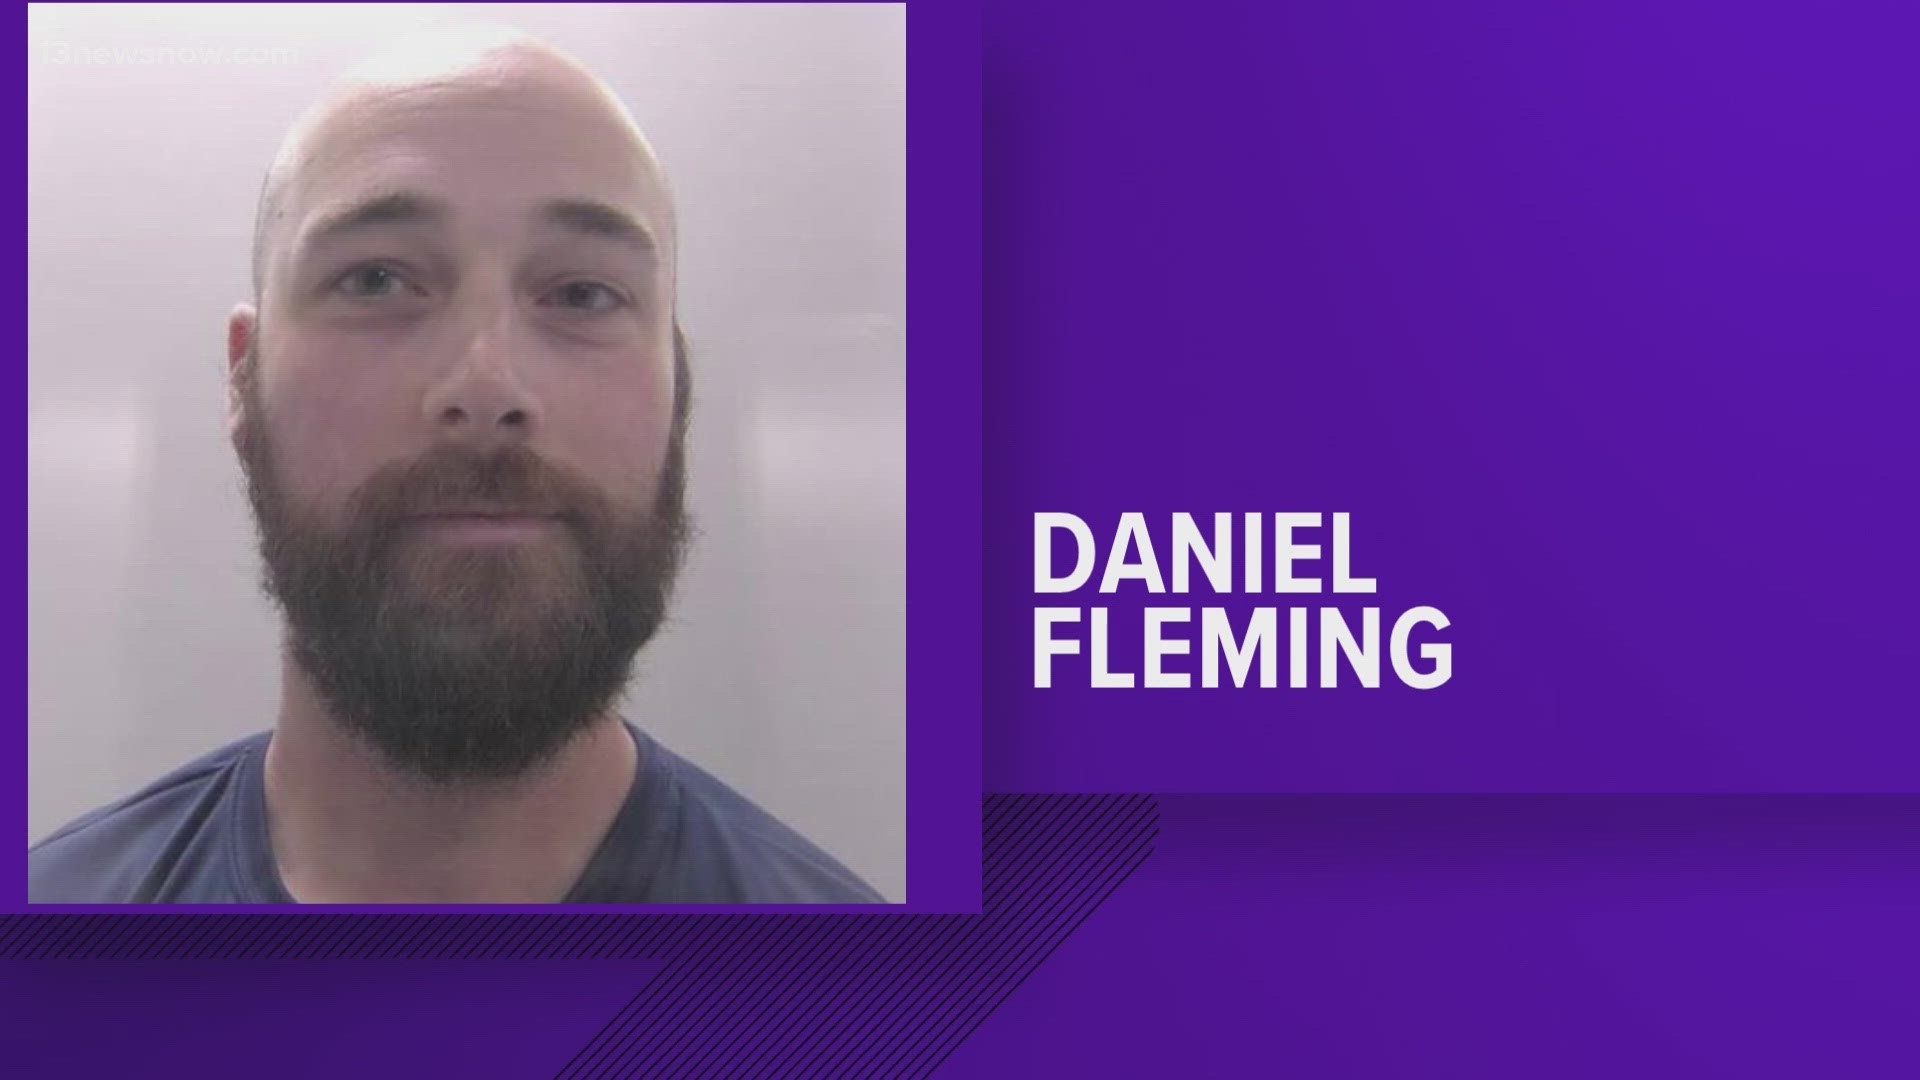 Police received info in January alleging Daniel Fleming's involvement in illegal activities with minors. Police said he was active in local church youth ministries.